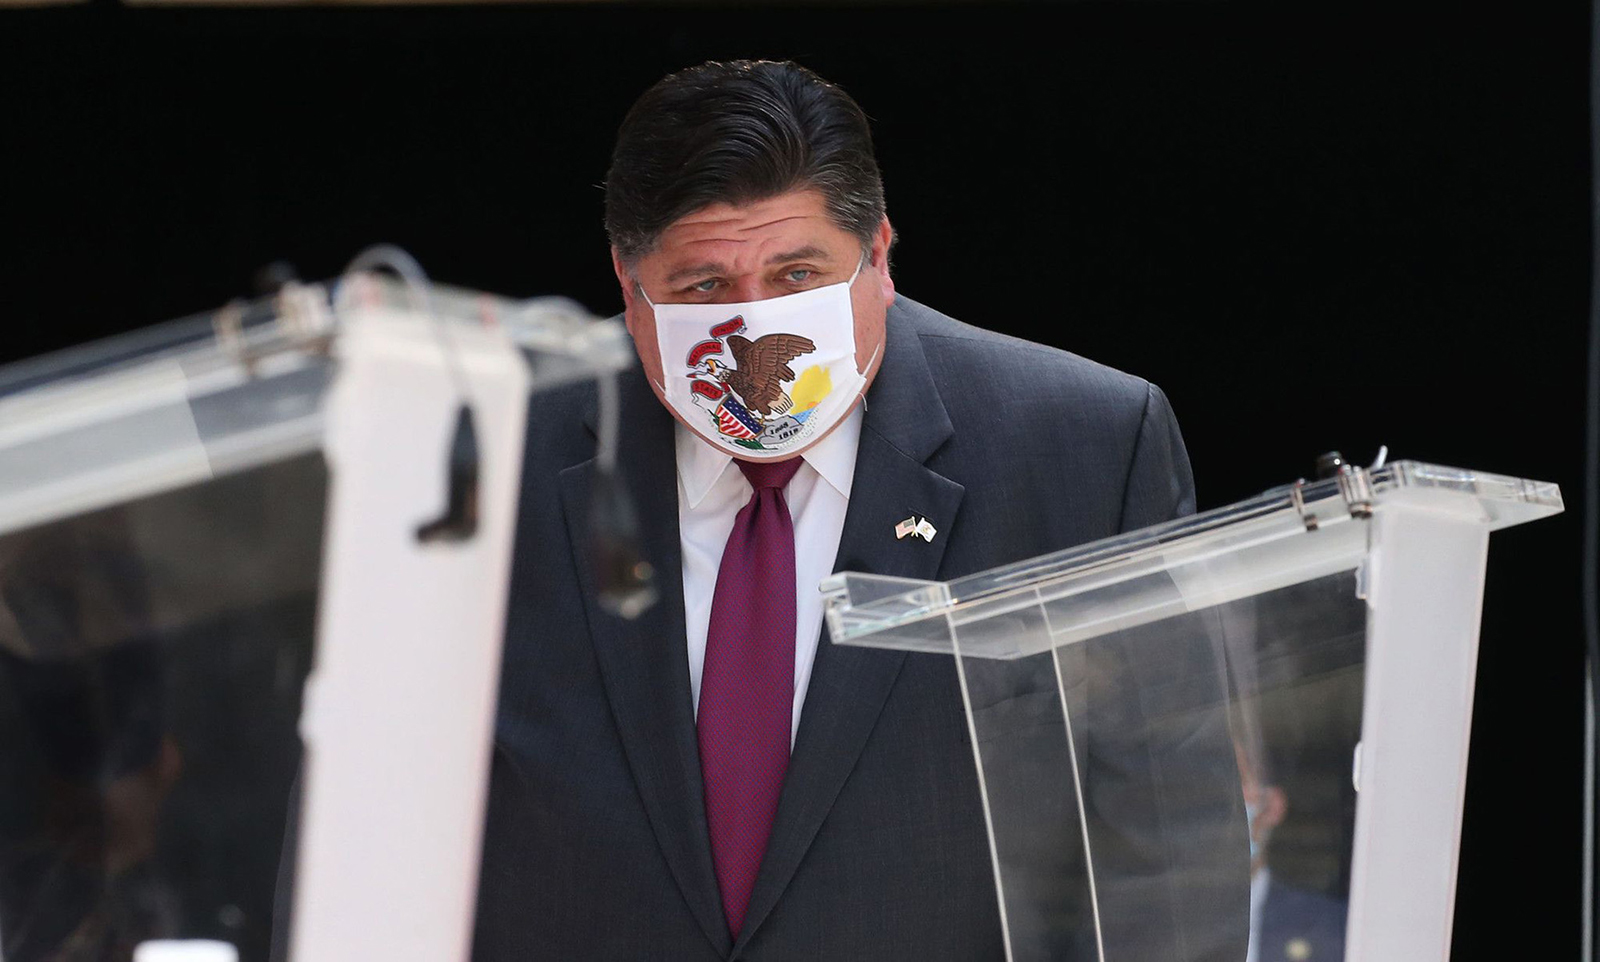 Illinois Gov. J.B. Pritzker at a news conference at the University of Chicago's Harper Center on July 23.